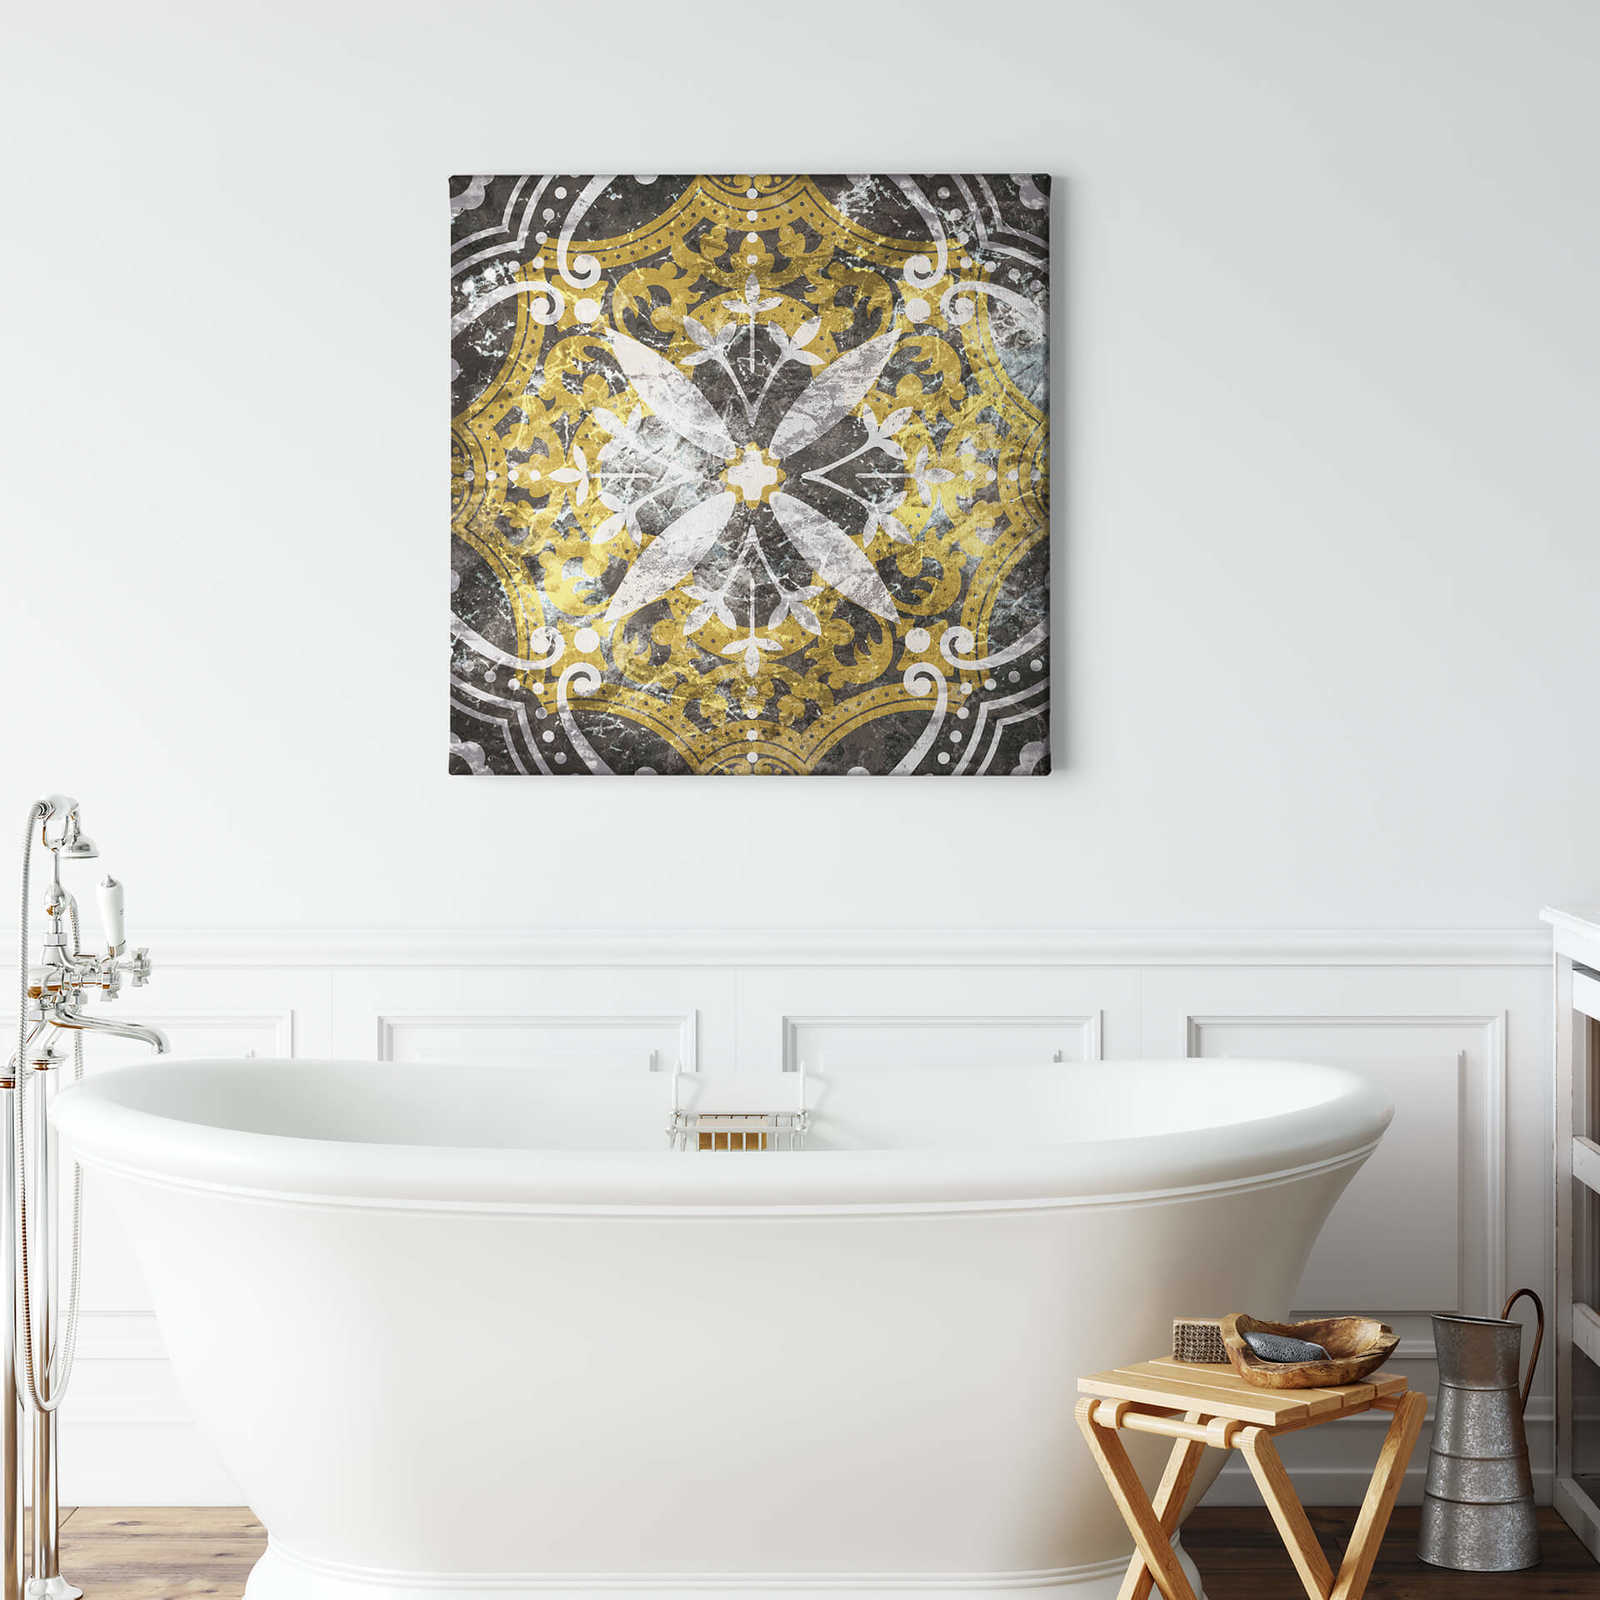             Canvas print square abstract art – blue, yellow
        